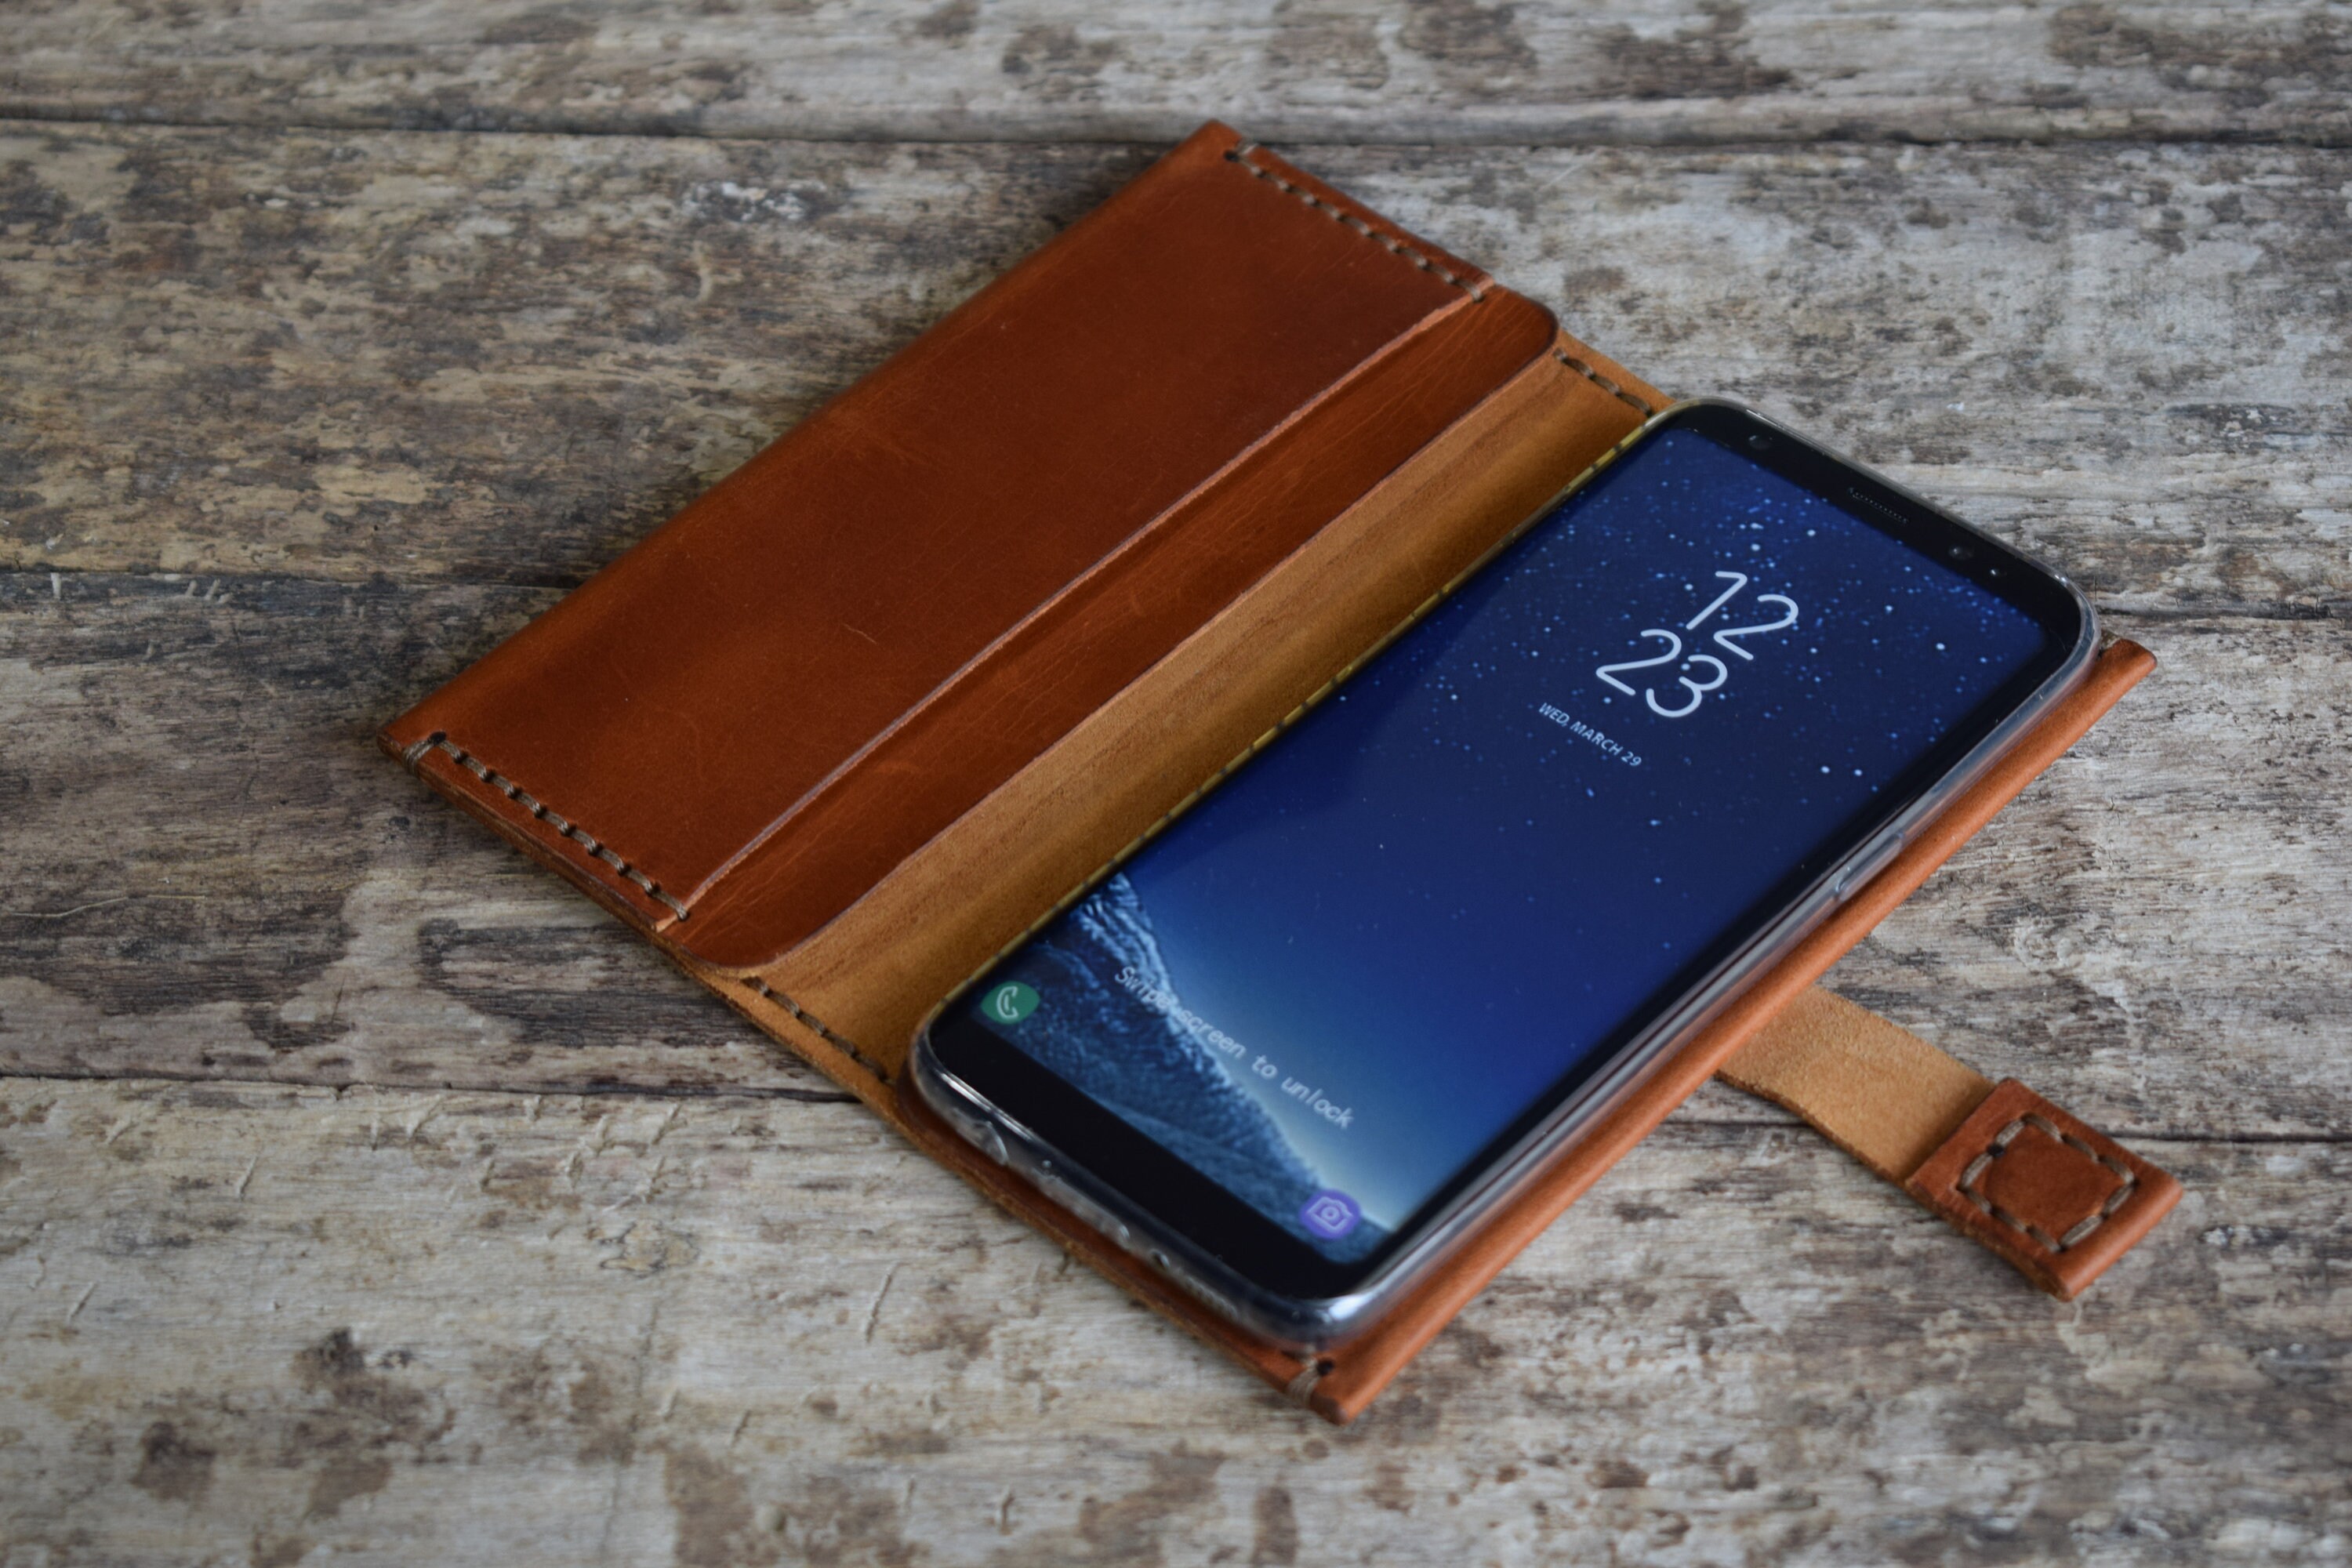 Leather Wallet Case for Samsung Galaxy S5 S6 S6 Edge S7 S7 Edge S8 S8 Plus  S9 S9 Plus S10 S10 Plus S10e S20 S20 Plus in Brown Flip Case 